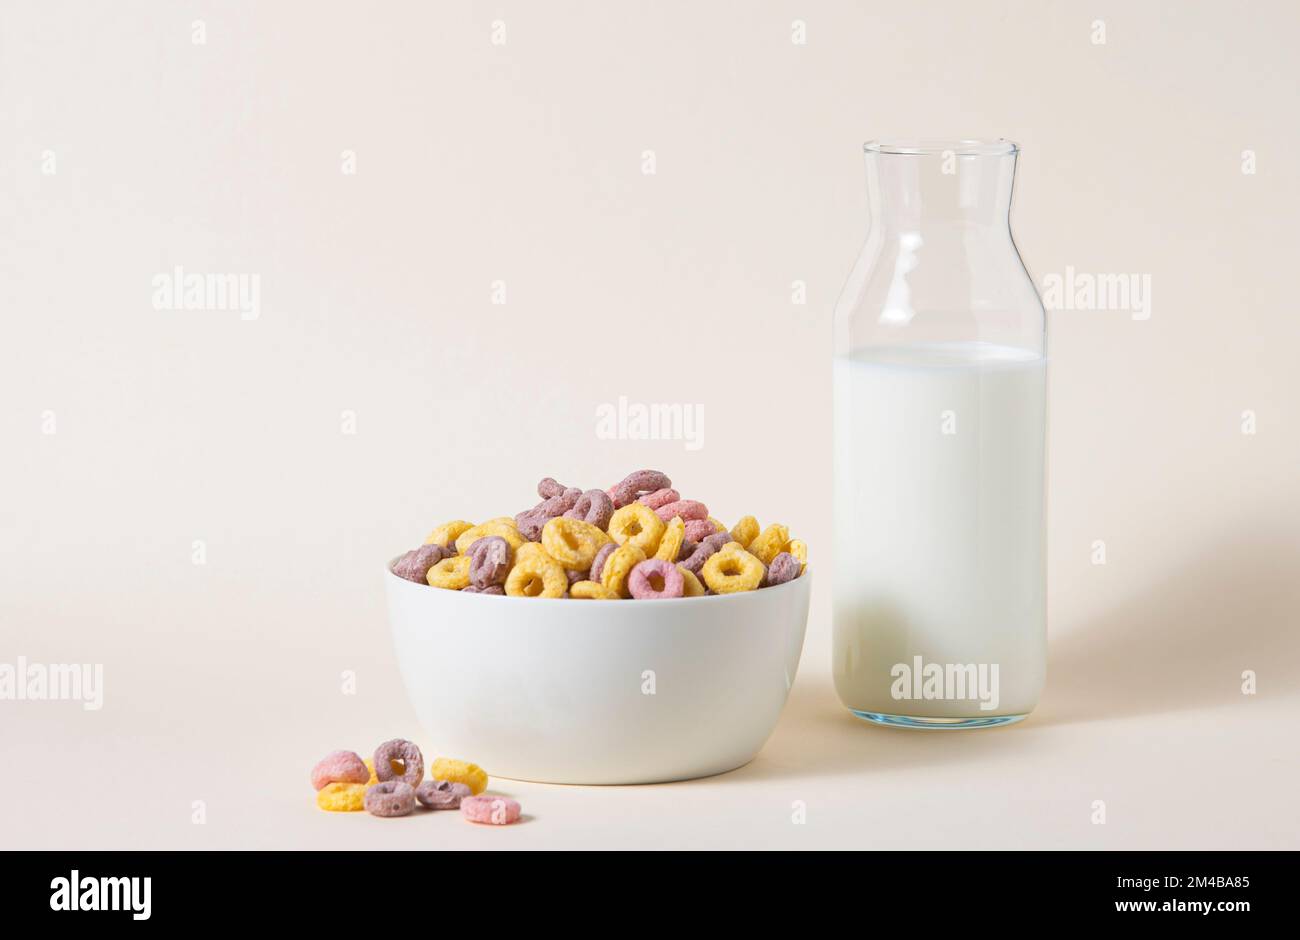 sweet colorful cornflakes rings in a white bowl with a bottle of milk on a yellow background. Front view and copy space image Stock Photo